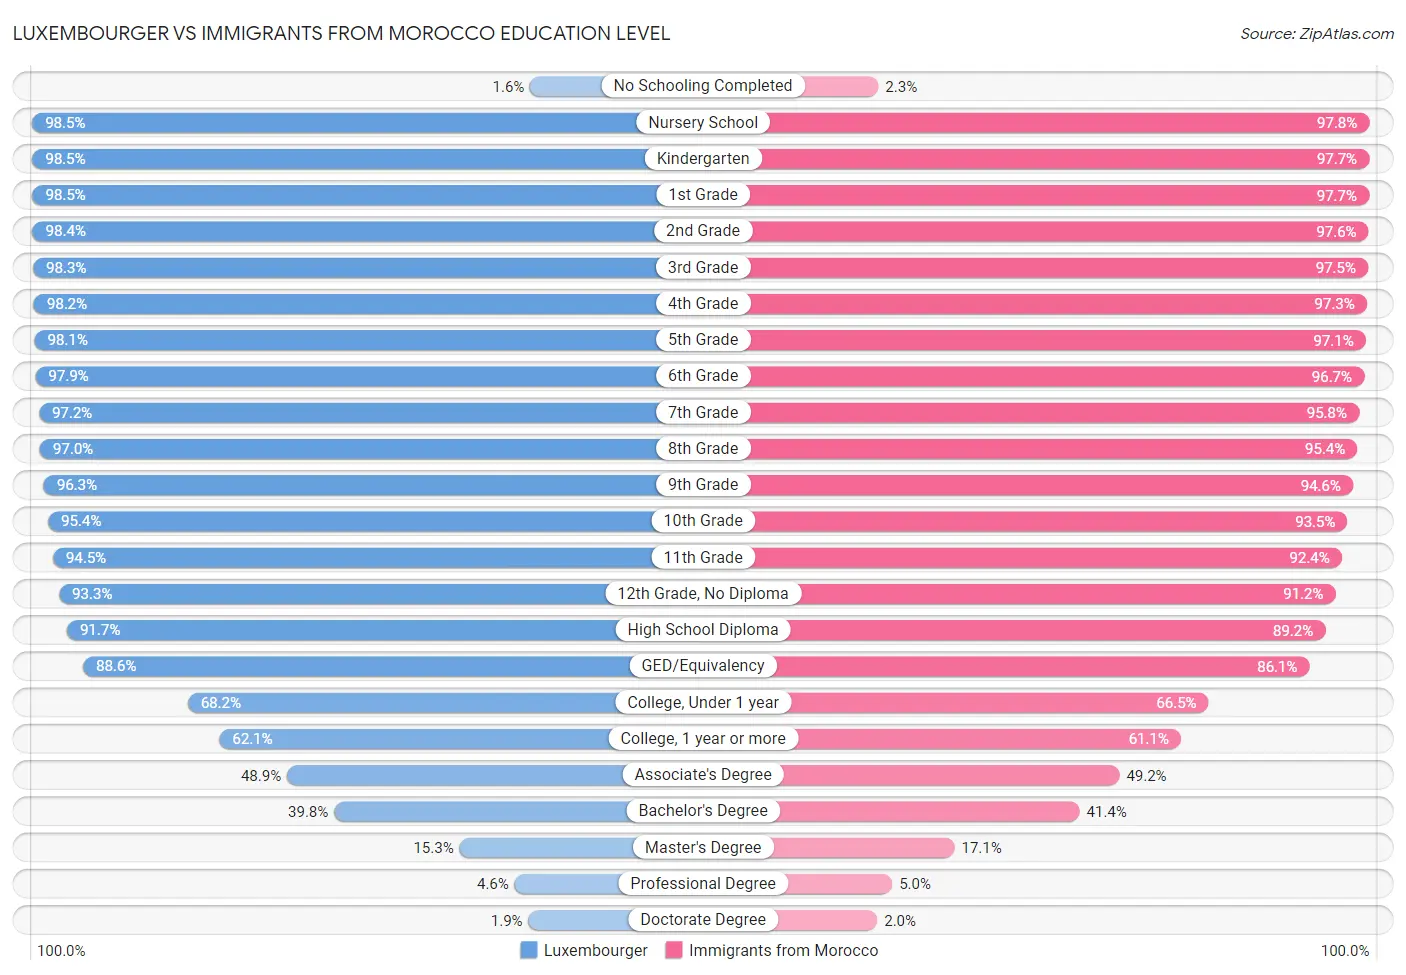 Luxembourger vs Immigrants from Morocco Education Level